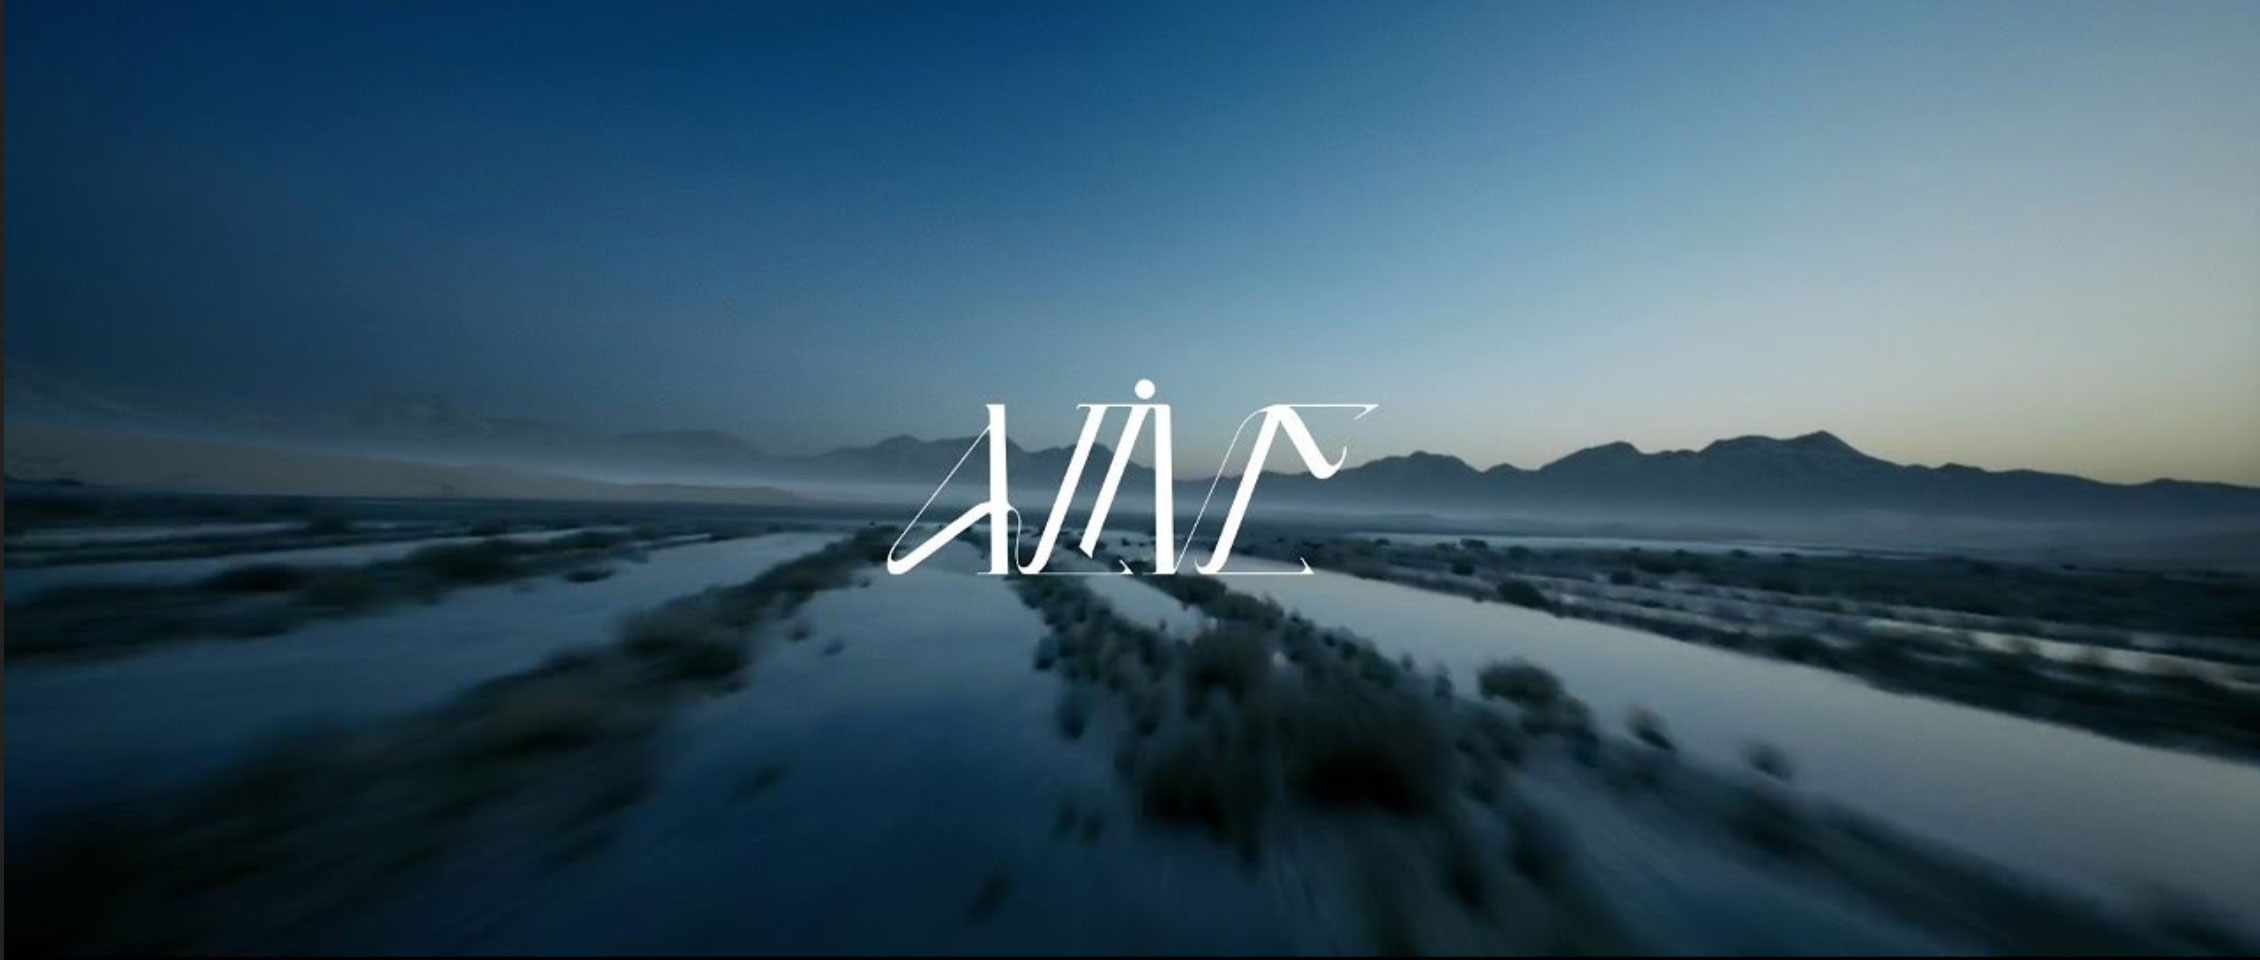 Alive: FPV-style drone footage shot inside Unreal Engine